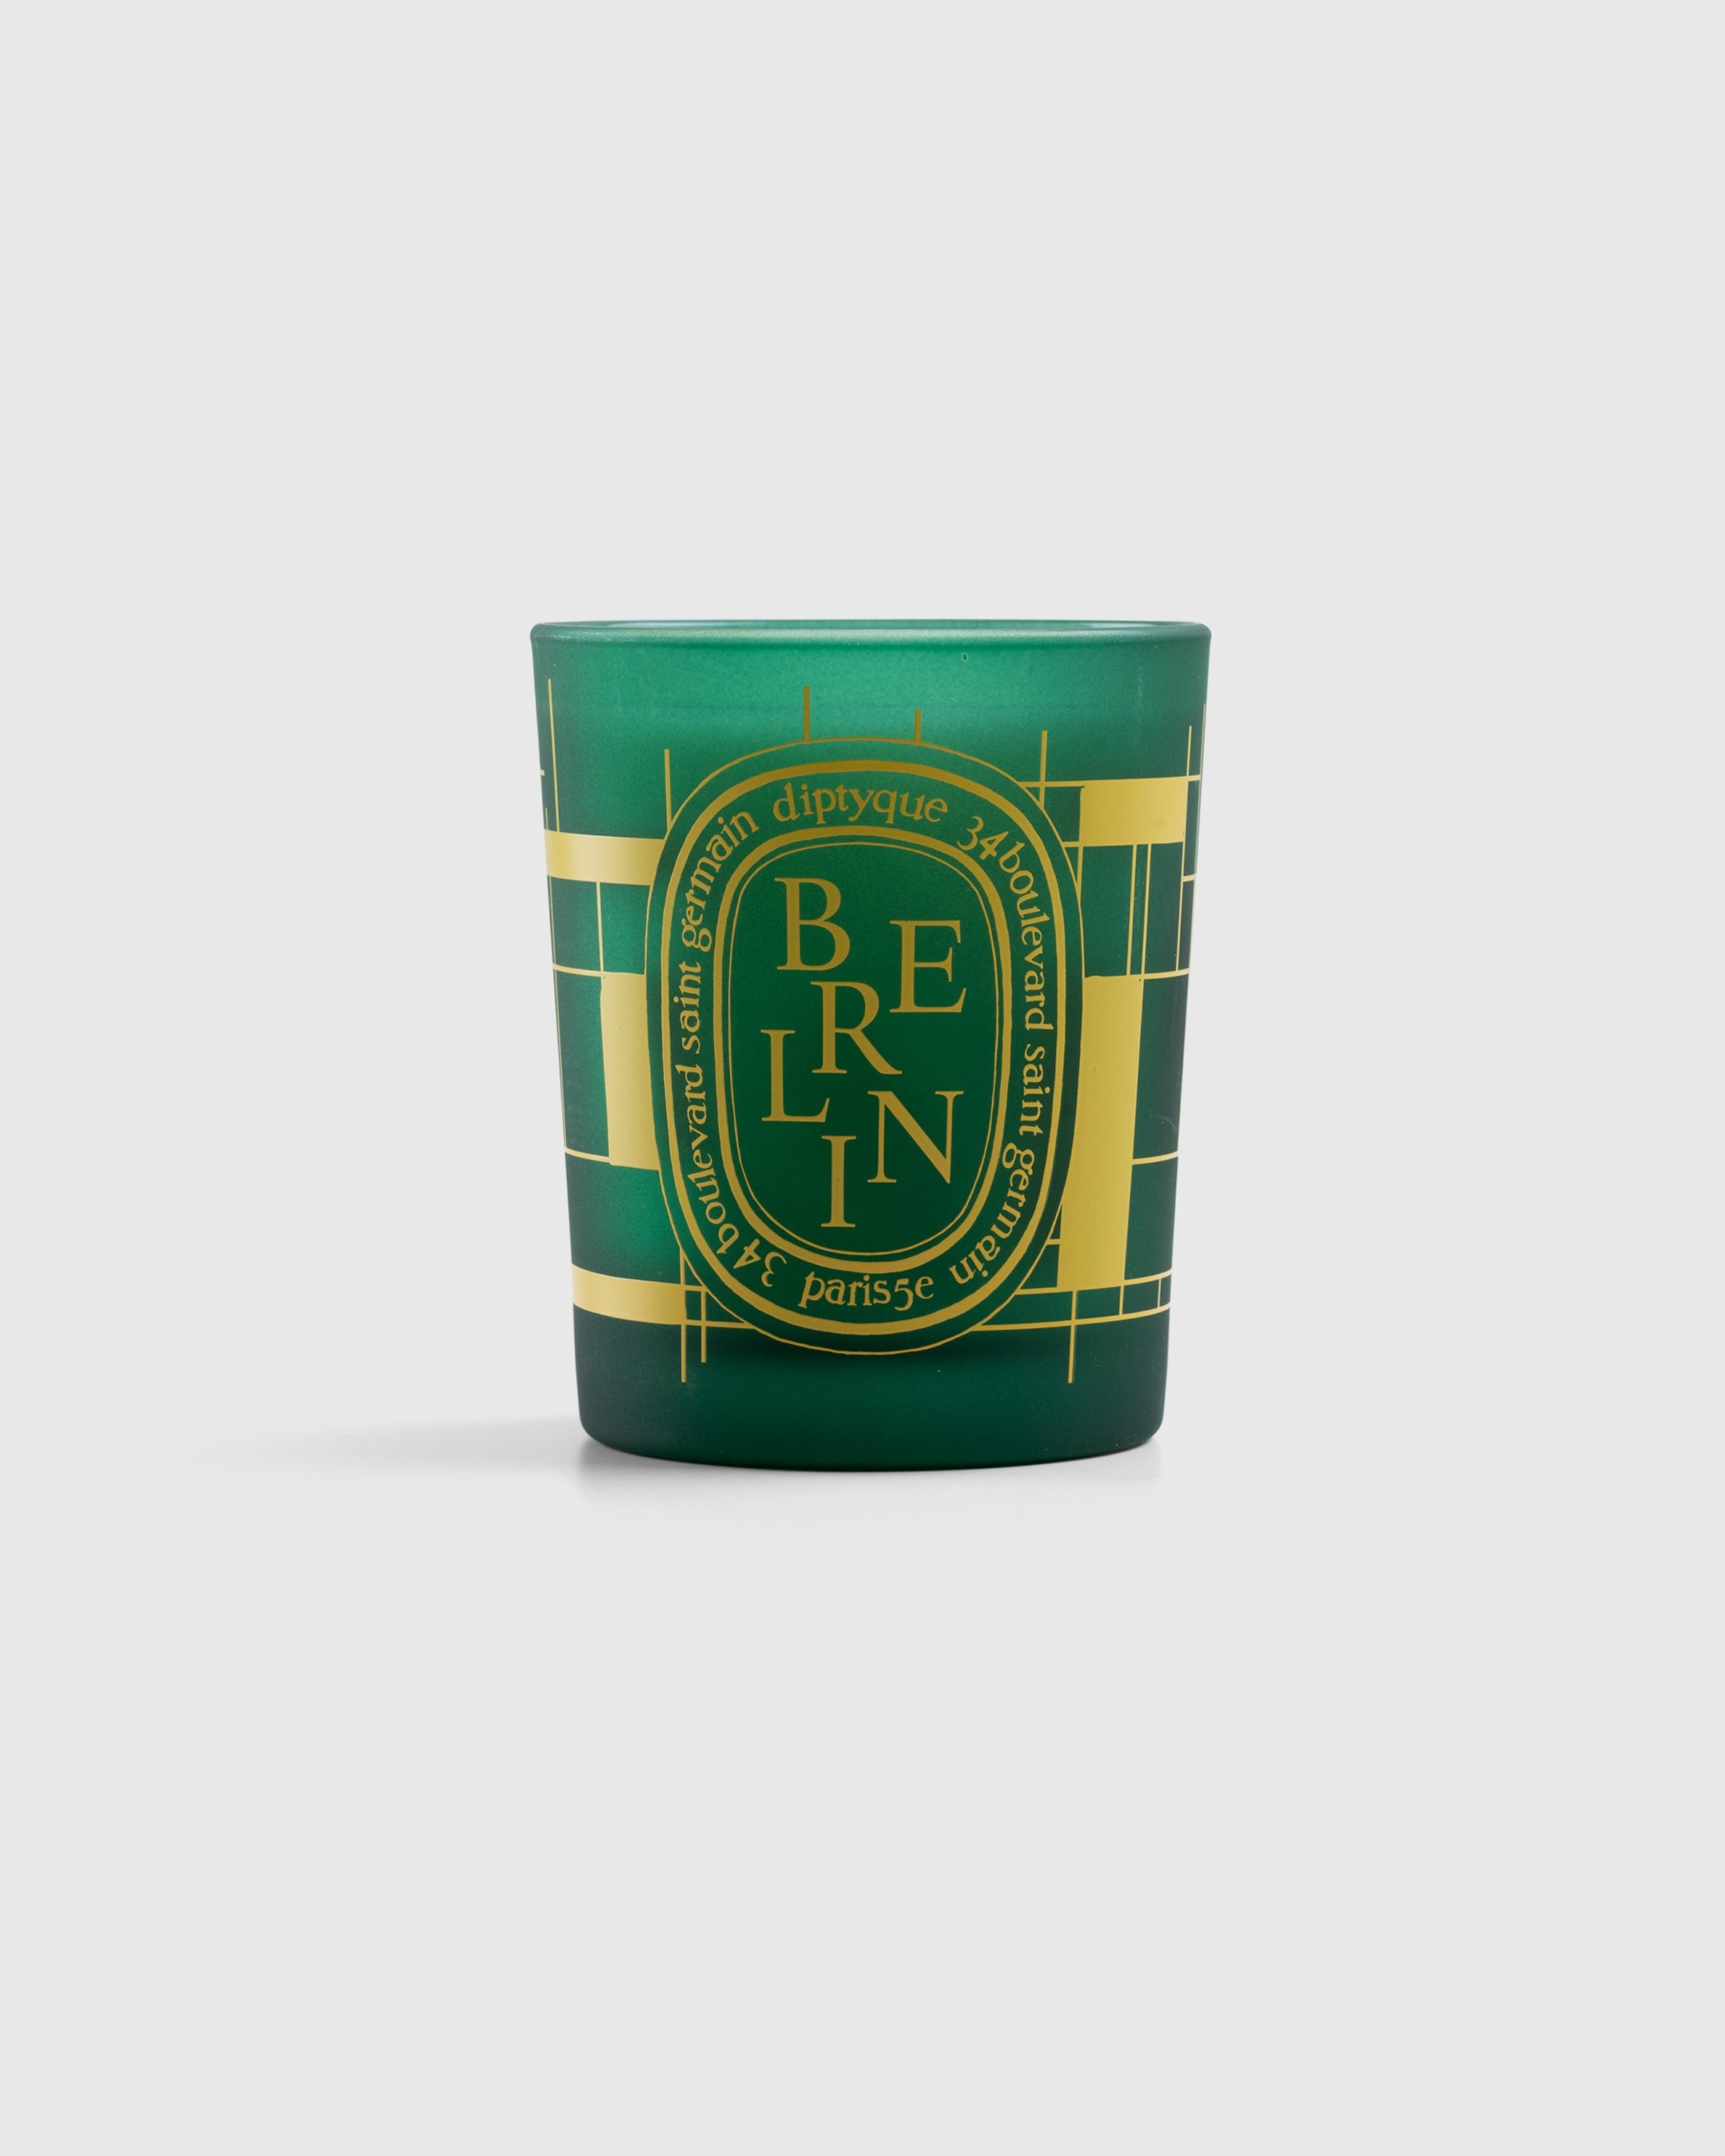 Diptyque – Berlin City Candle - Candles & Fragrances - Green - Image 1